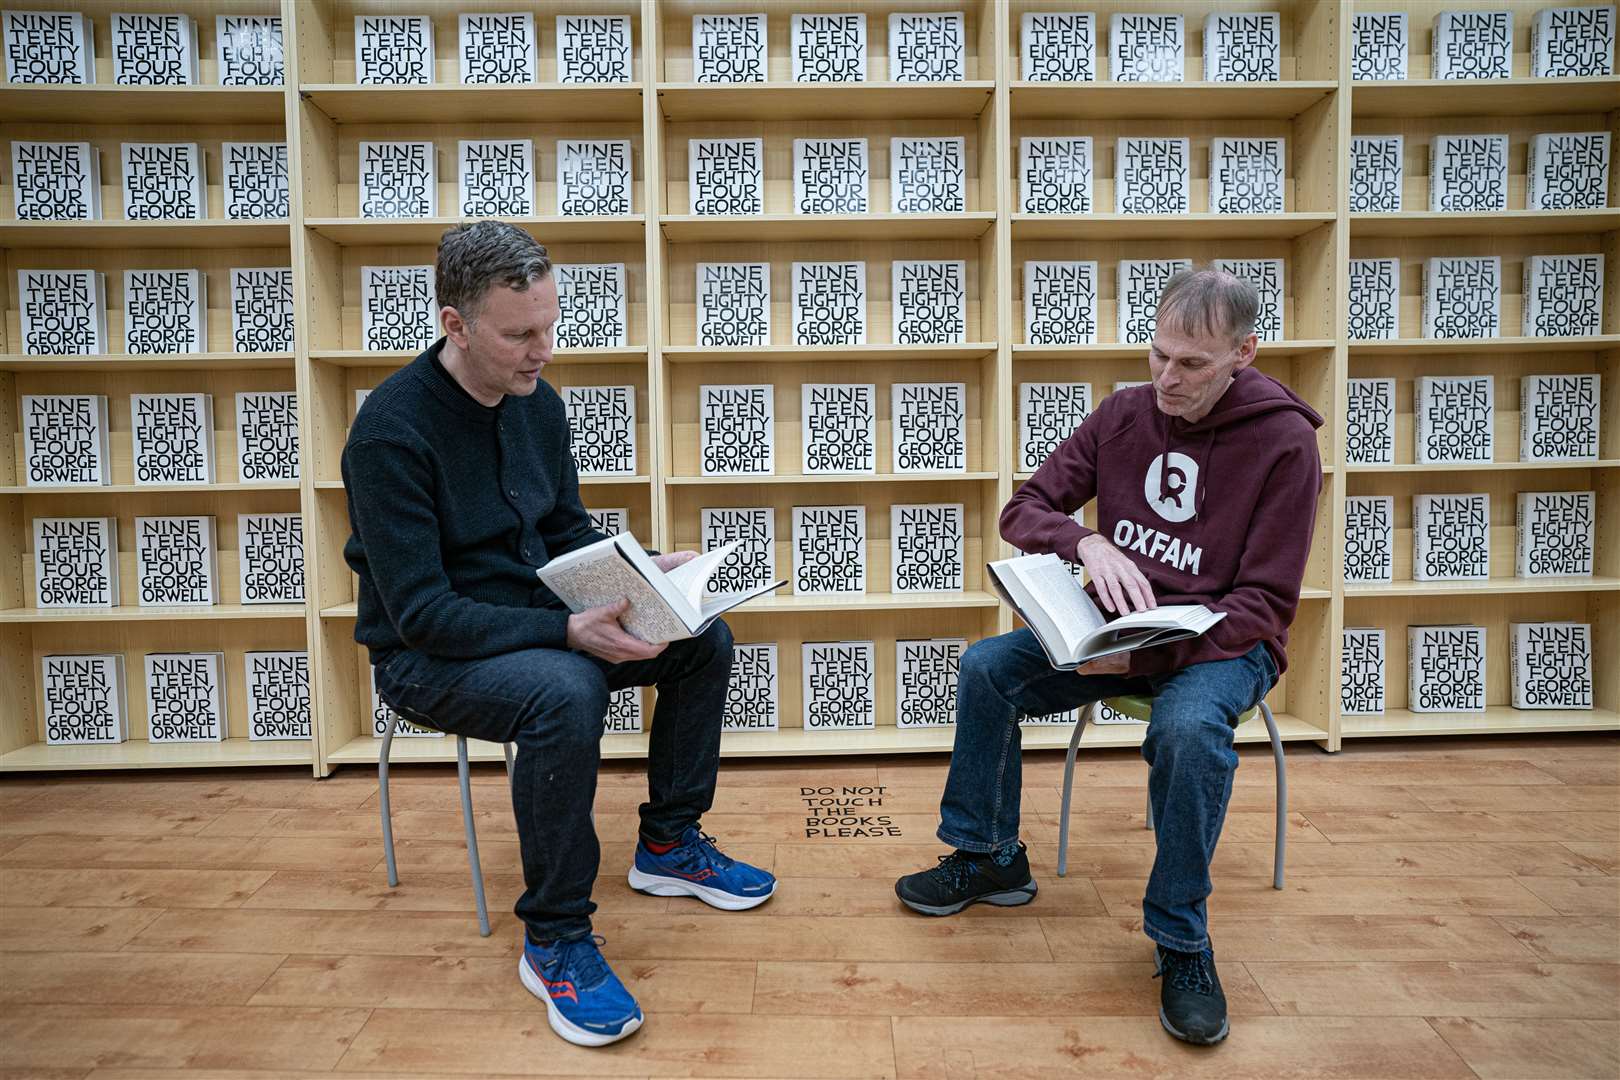 David Shrigley and Phil Broadhurst, from Oxfam, leaf through books as they chat about David’s Pulped Fiction installation in Swansea (Ben Birchall/PA)